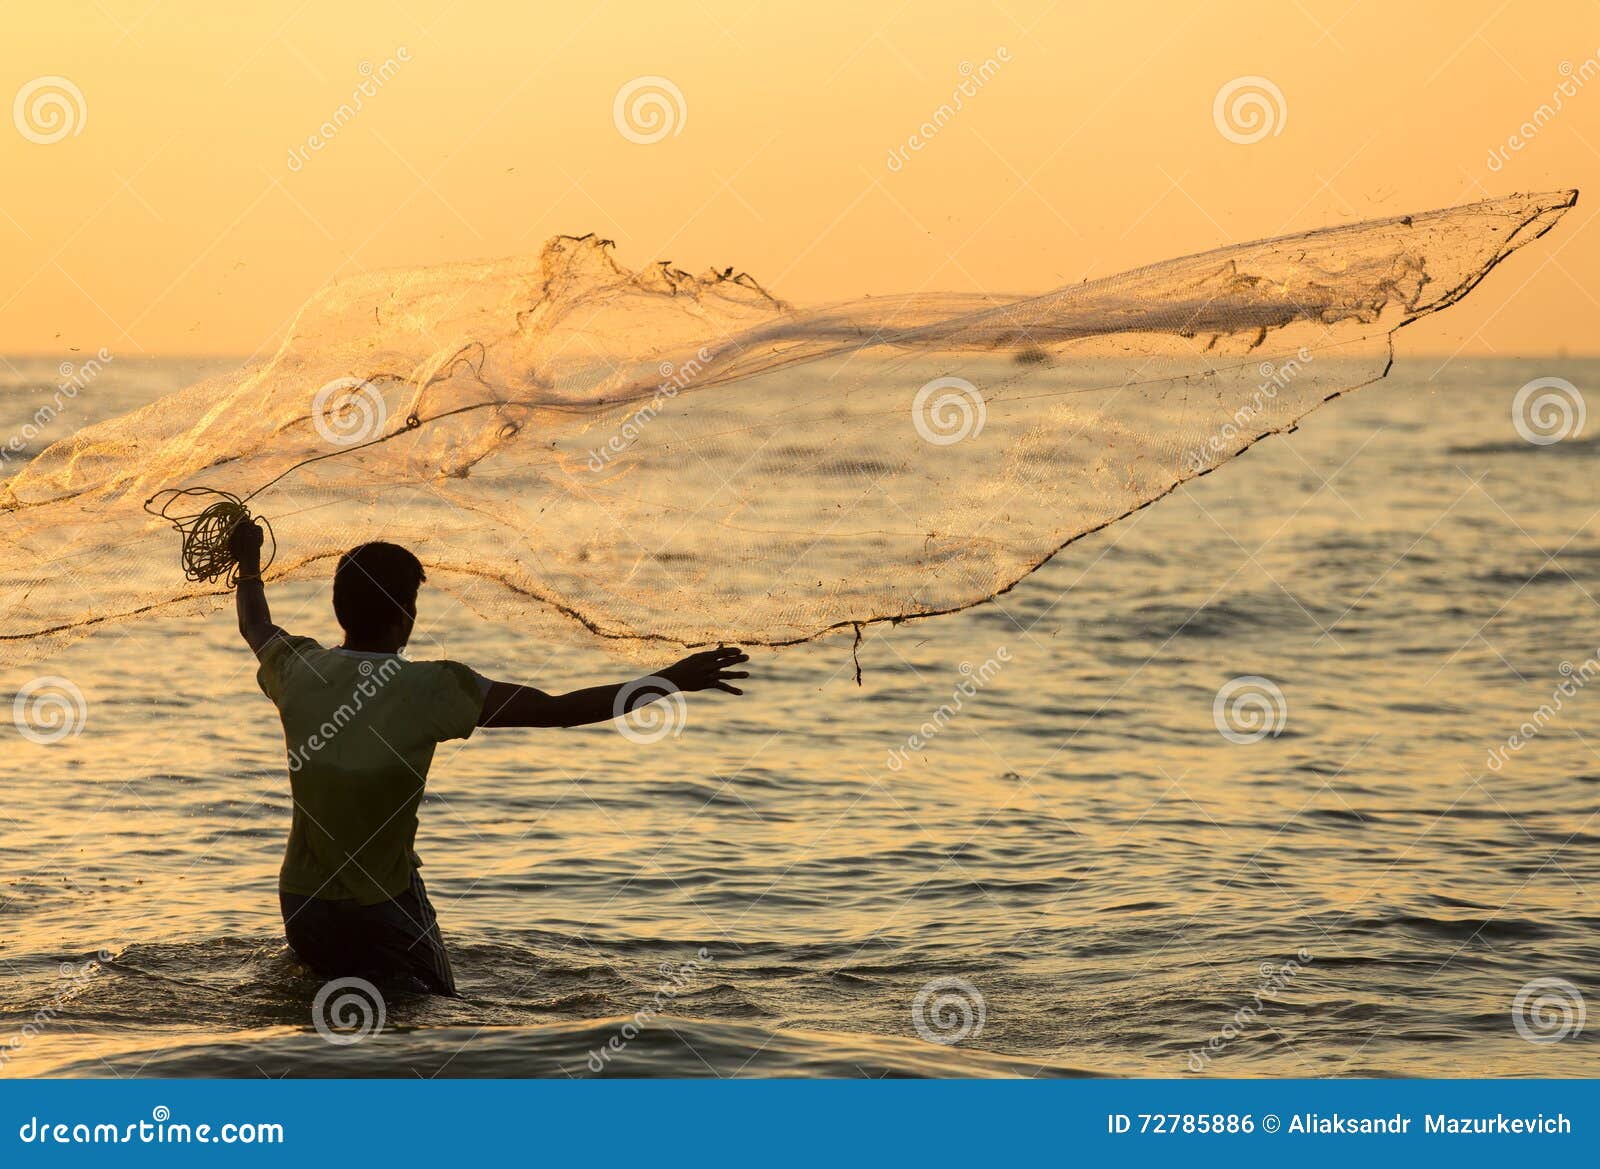 Indian Fisherman Photos and Images & Pictures, fisherman in india 